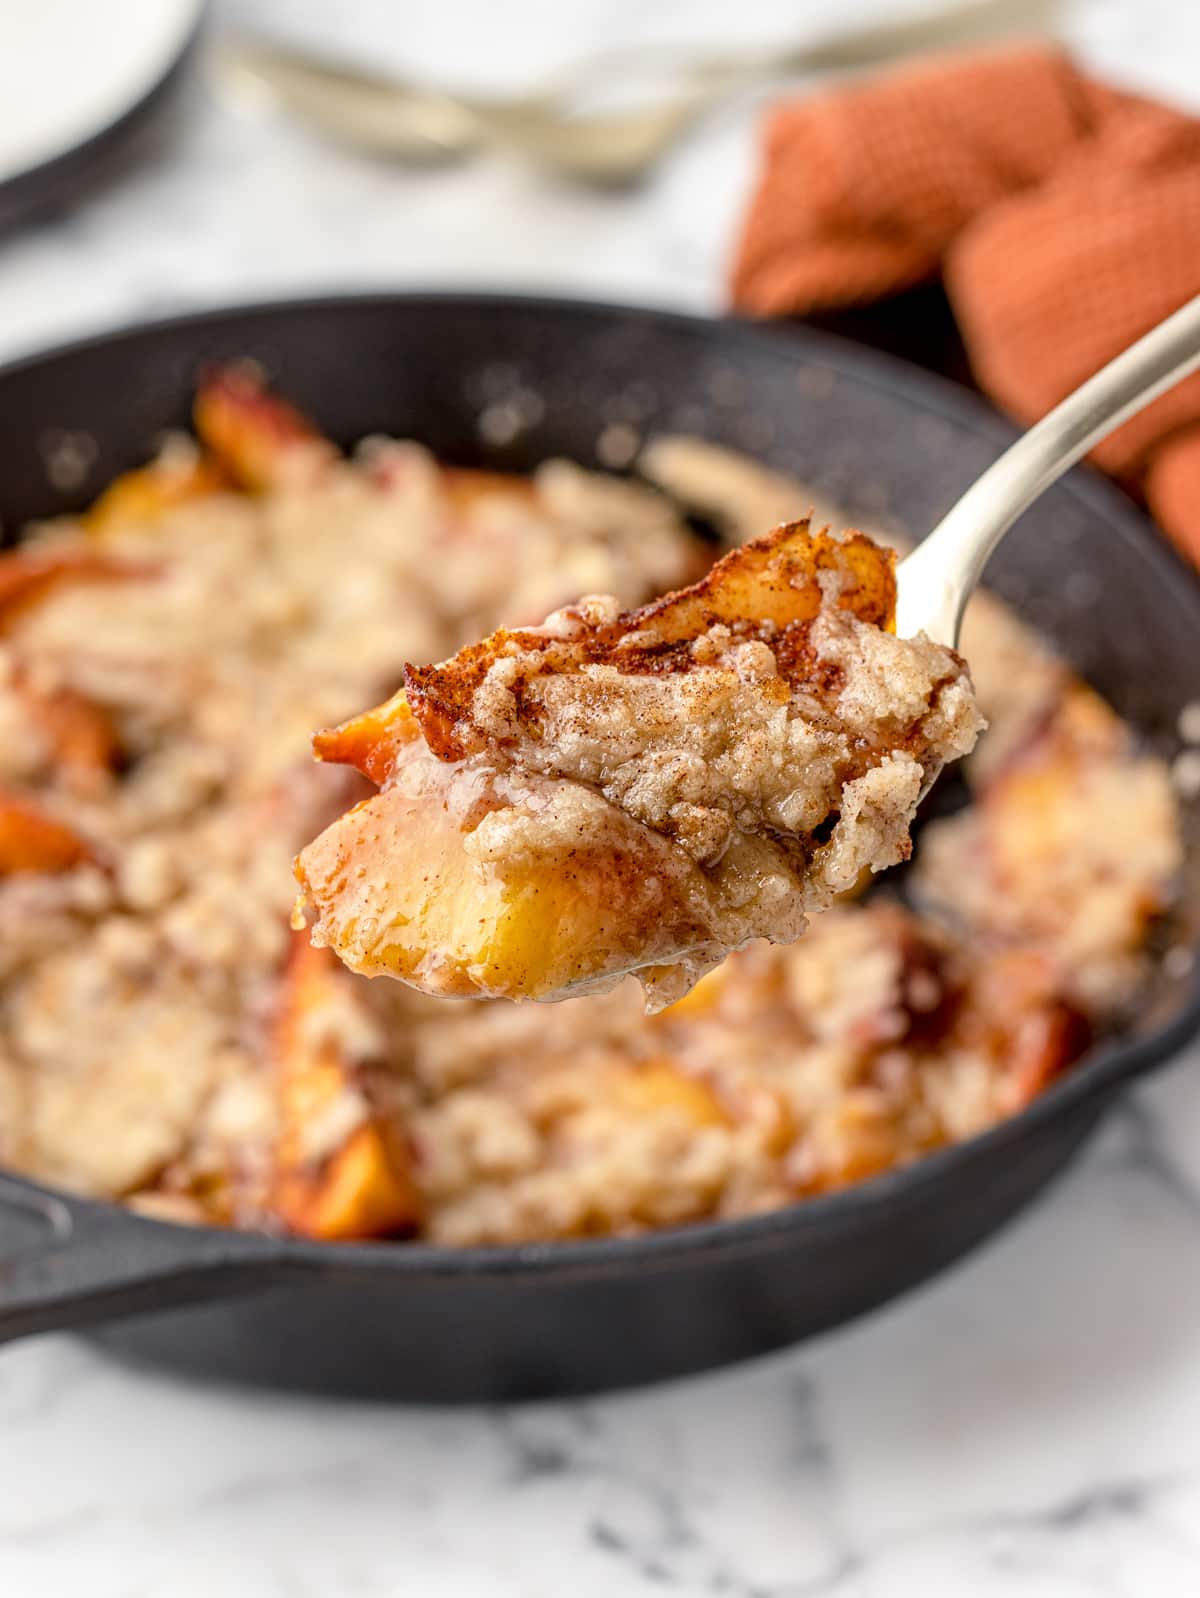 Bite of Smoked Peach Cobbler on a spoon.